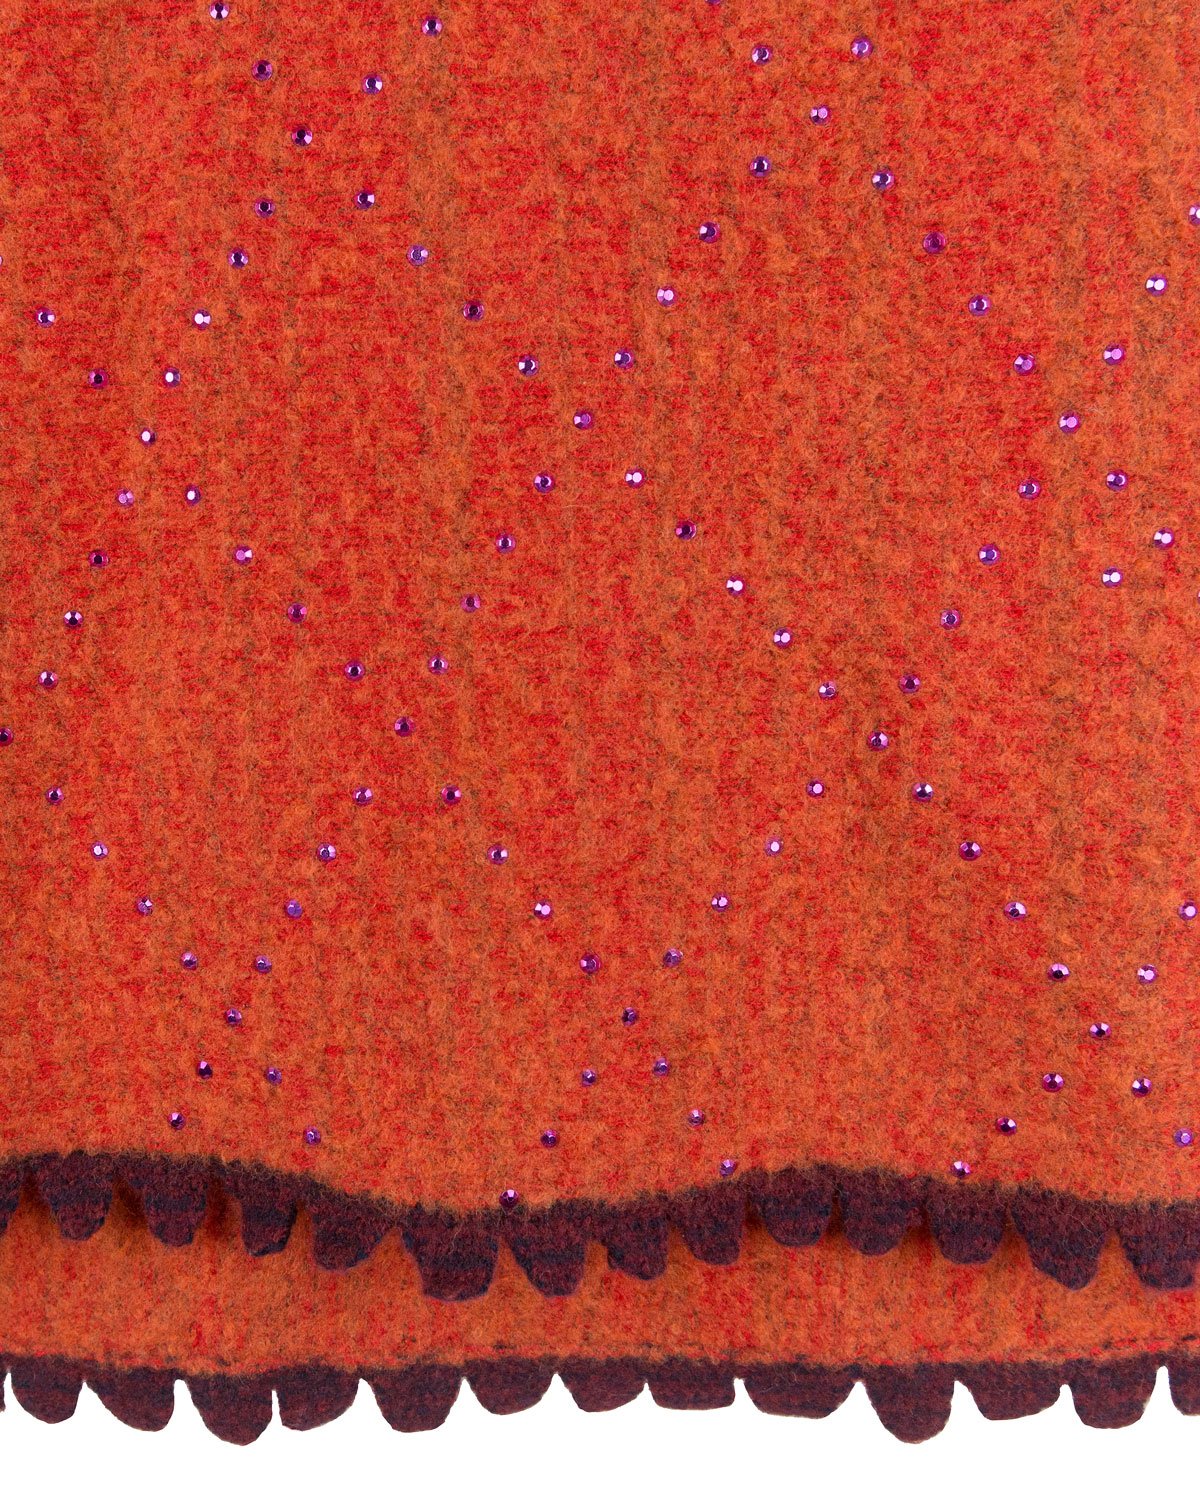 Persimmon colored Merino Boucle Knitted Throw fabric swatch.